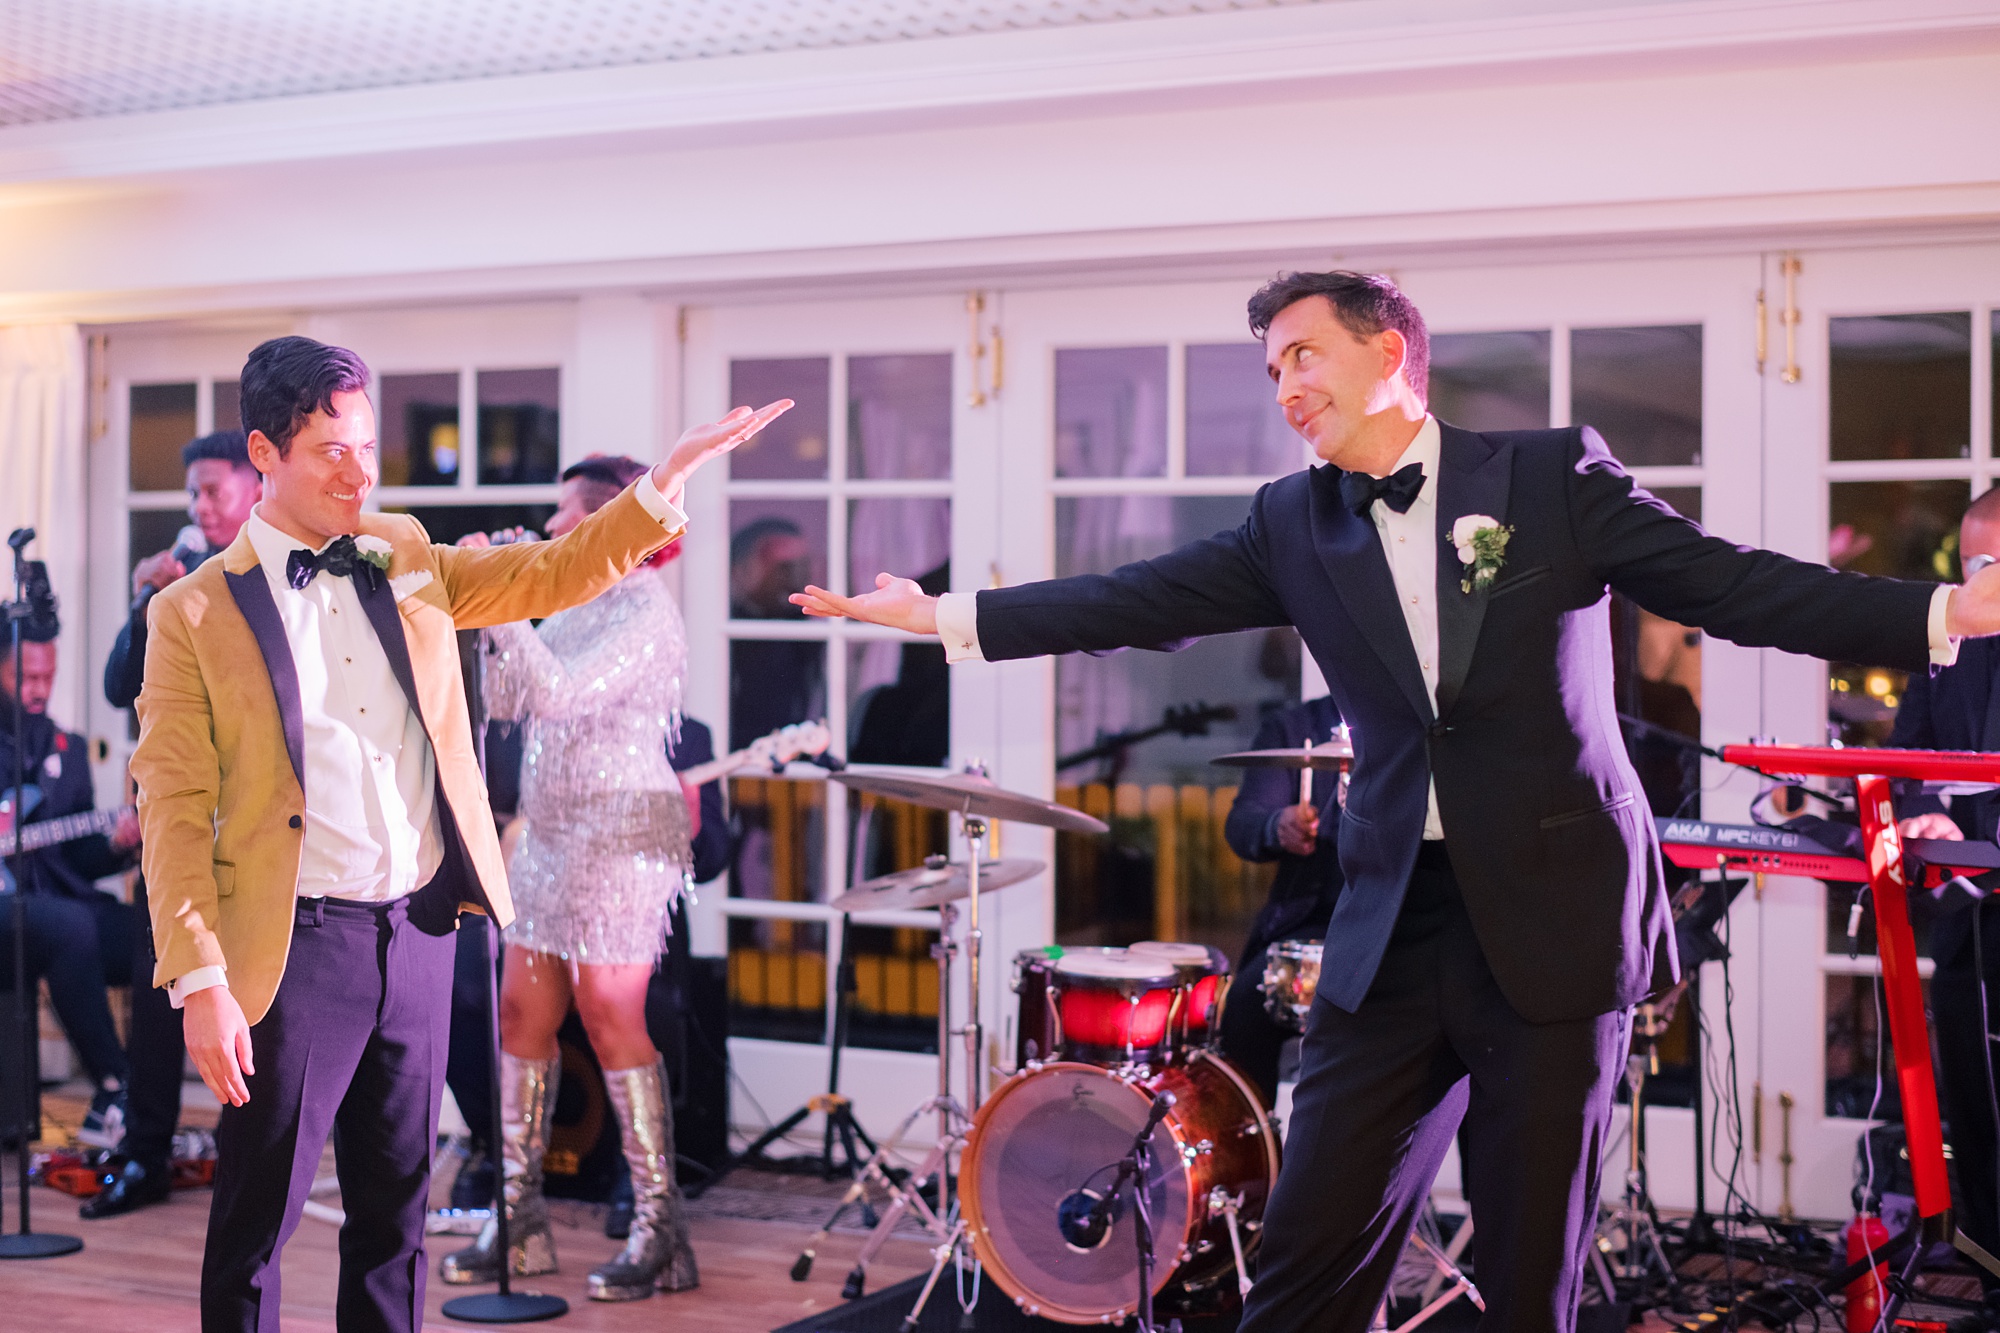 grooms dance during wedding reception at the Hay Adams Hotel